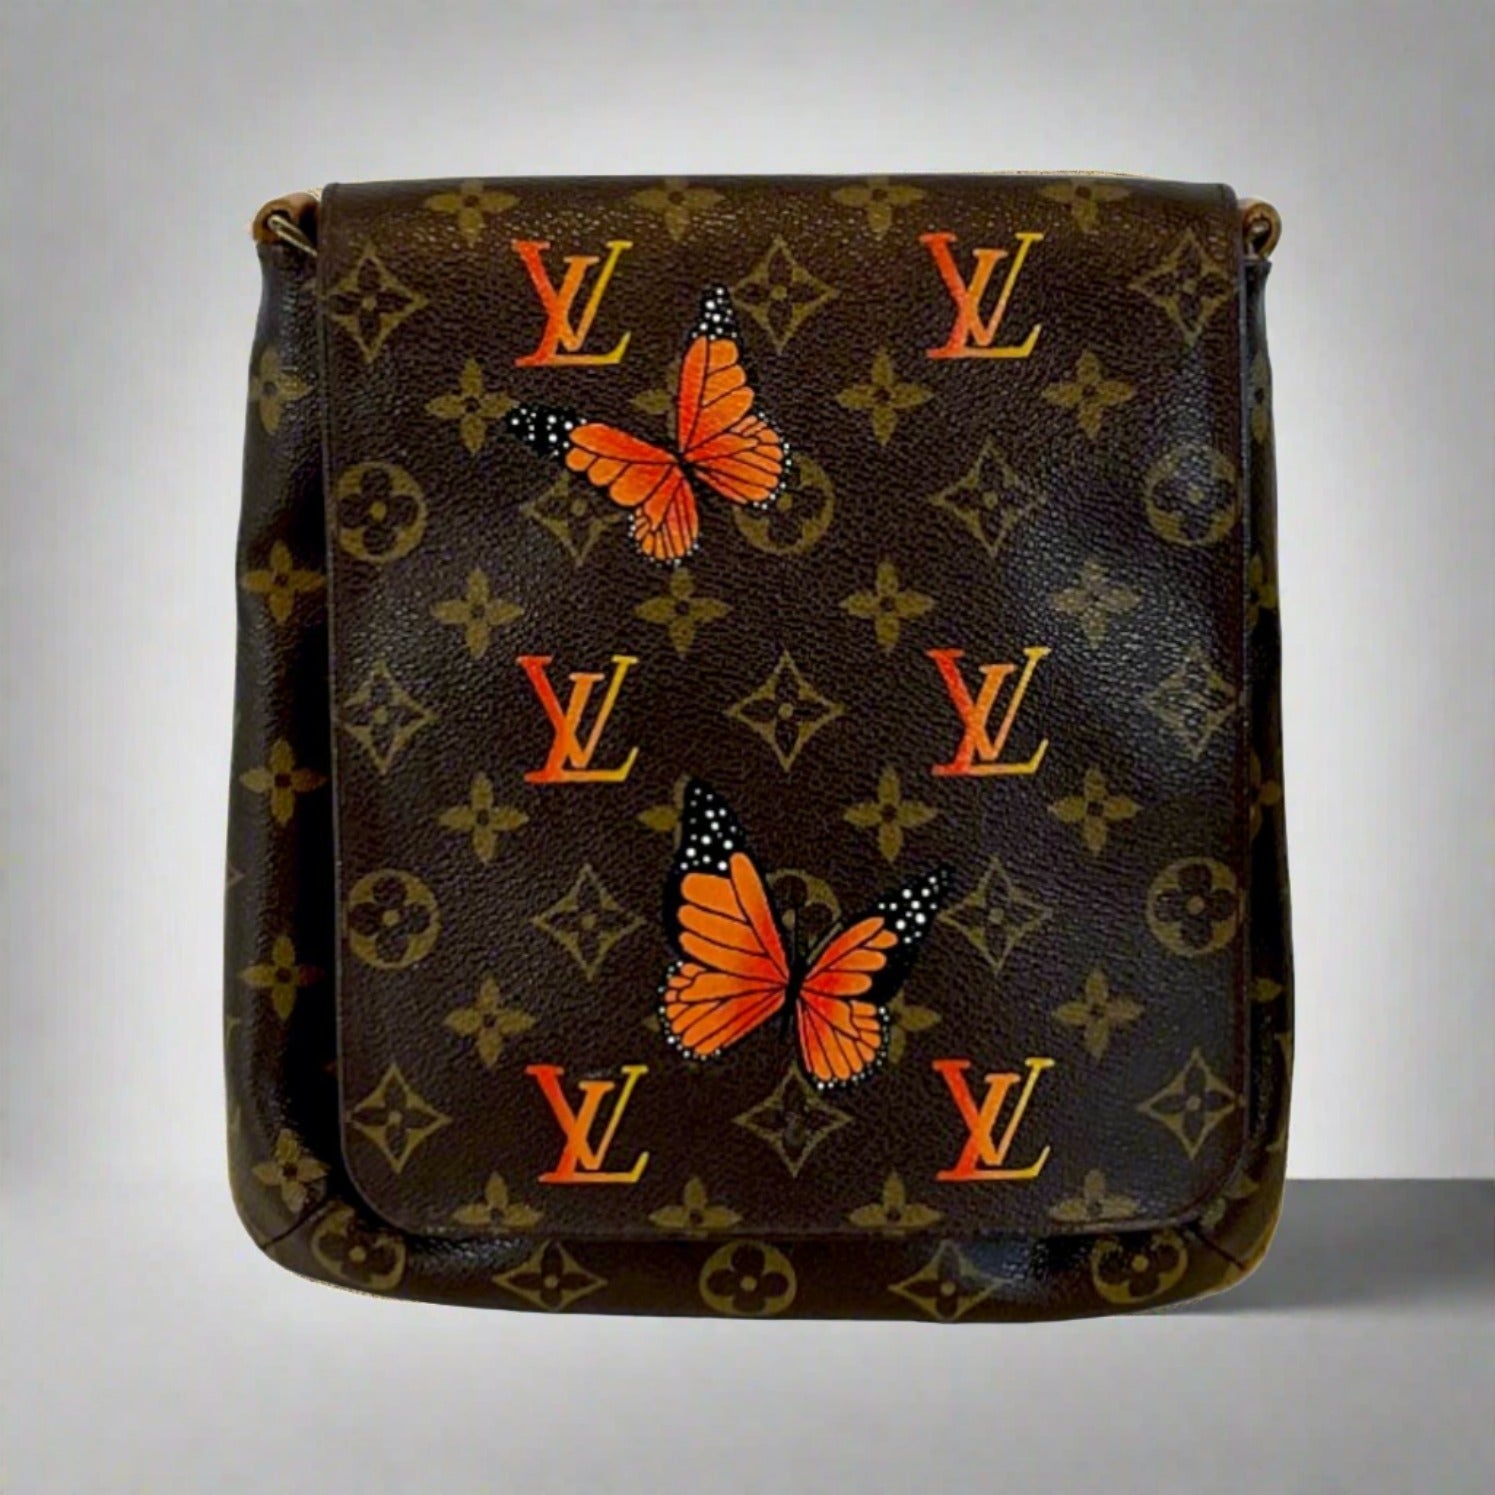 You've Really Got Love LoL to Buy the Latest Louis Vuitton Collection